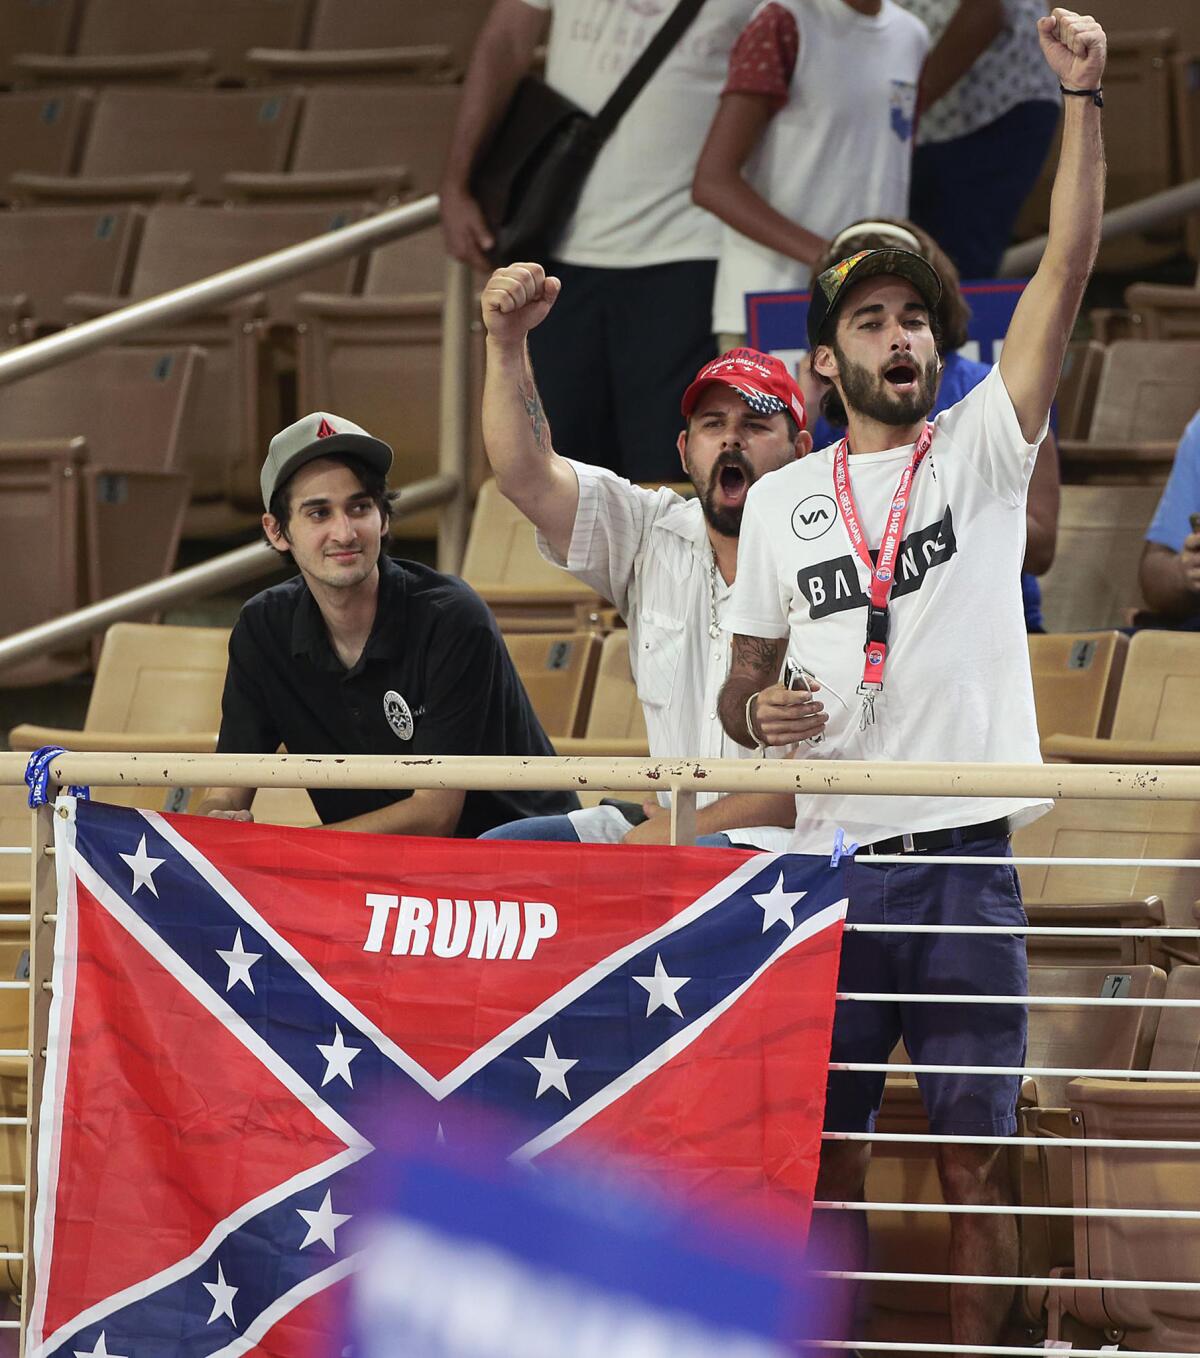 Supporters of Donald Trump caused a stir at a rally in Florida on Aug. 11 after they were asked to remove their Confederate flag.